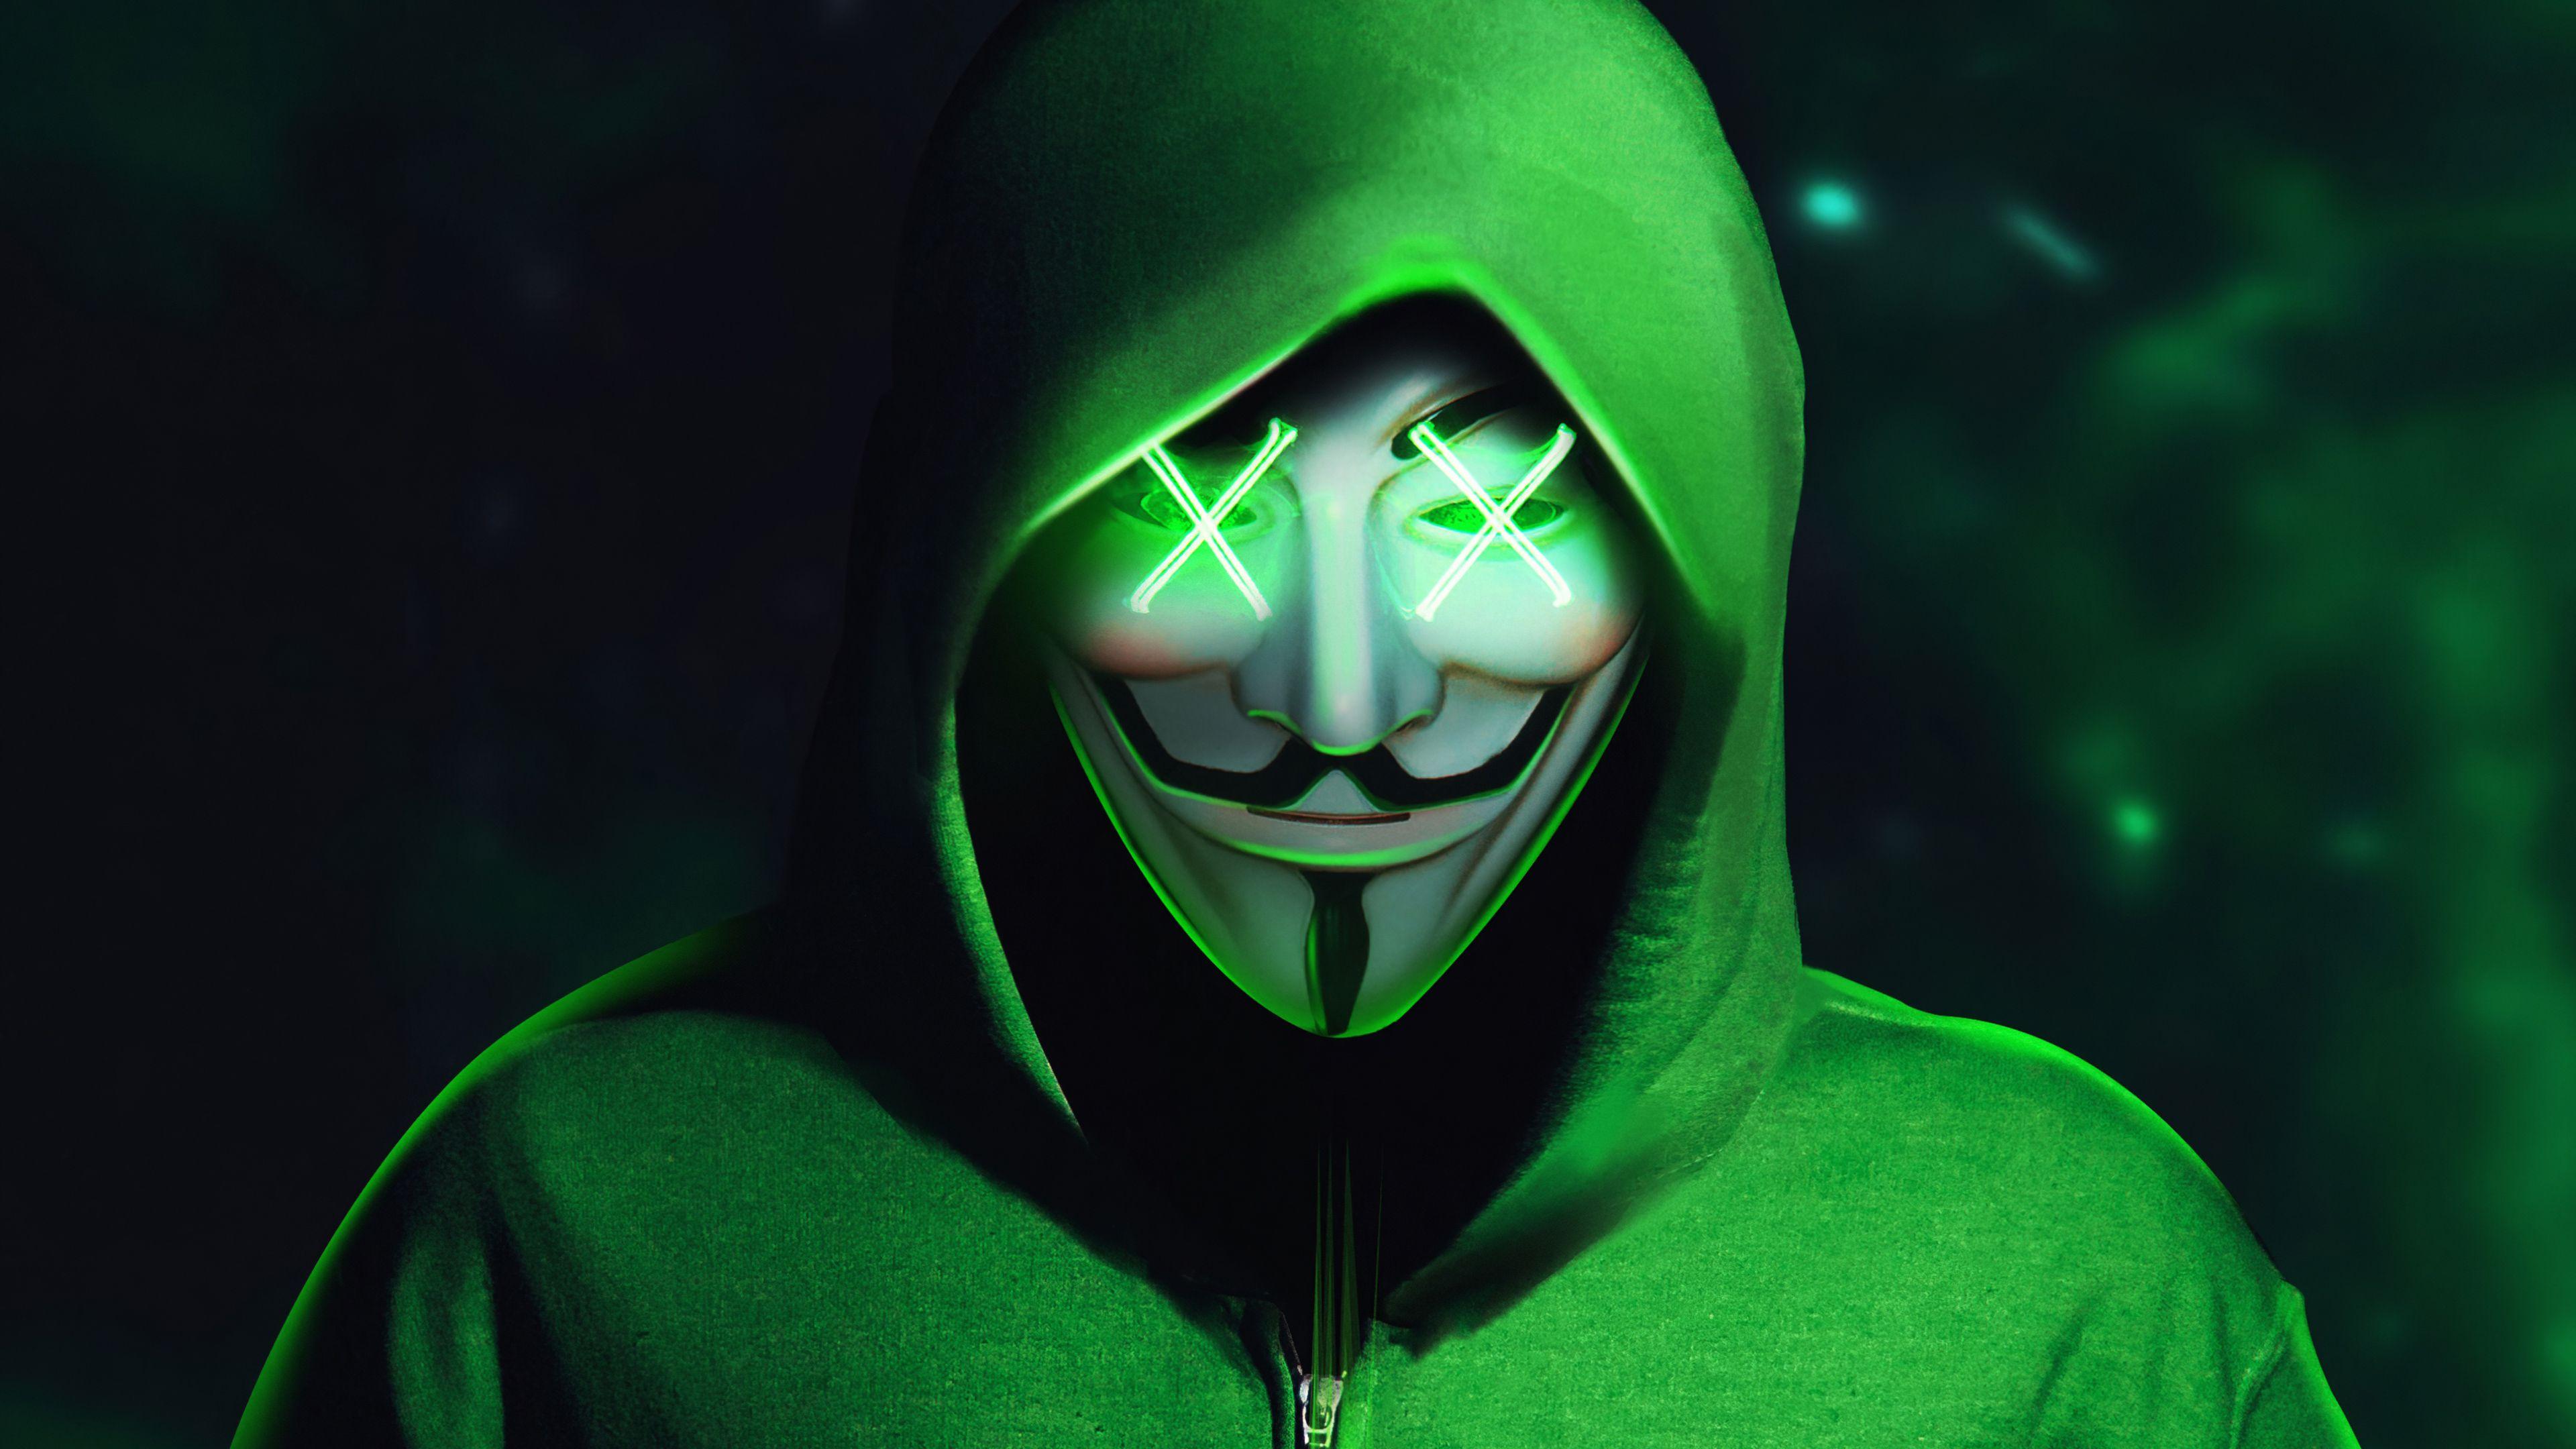 1500+ Guy Fawkes Mask Pictures | Download Free Images on Unsplash